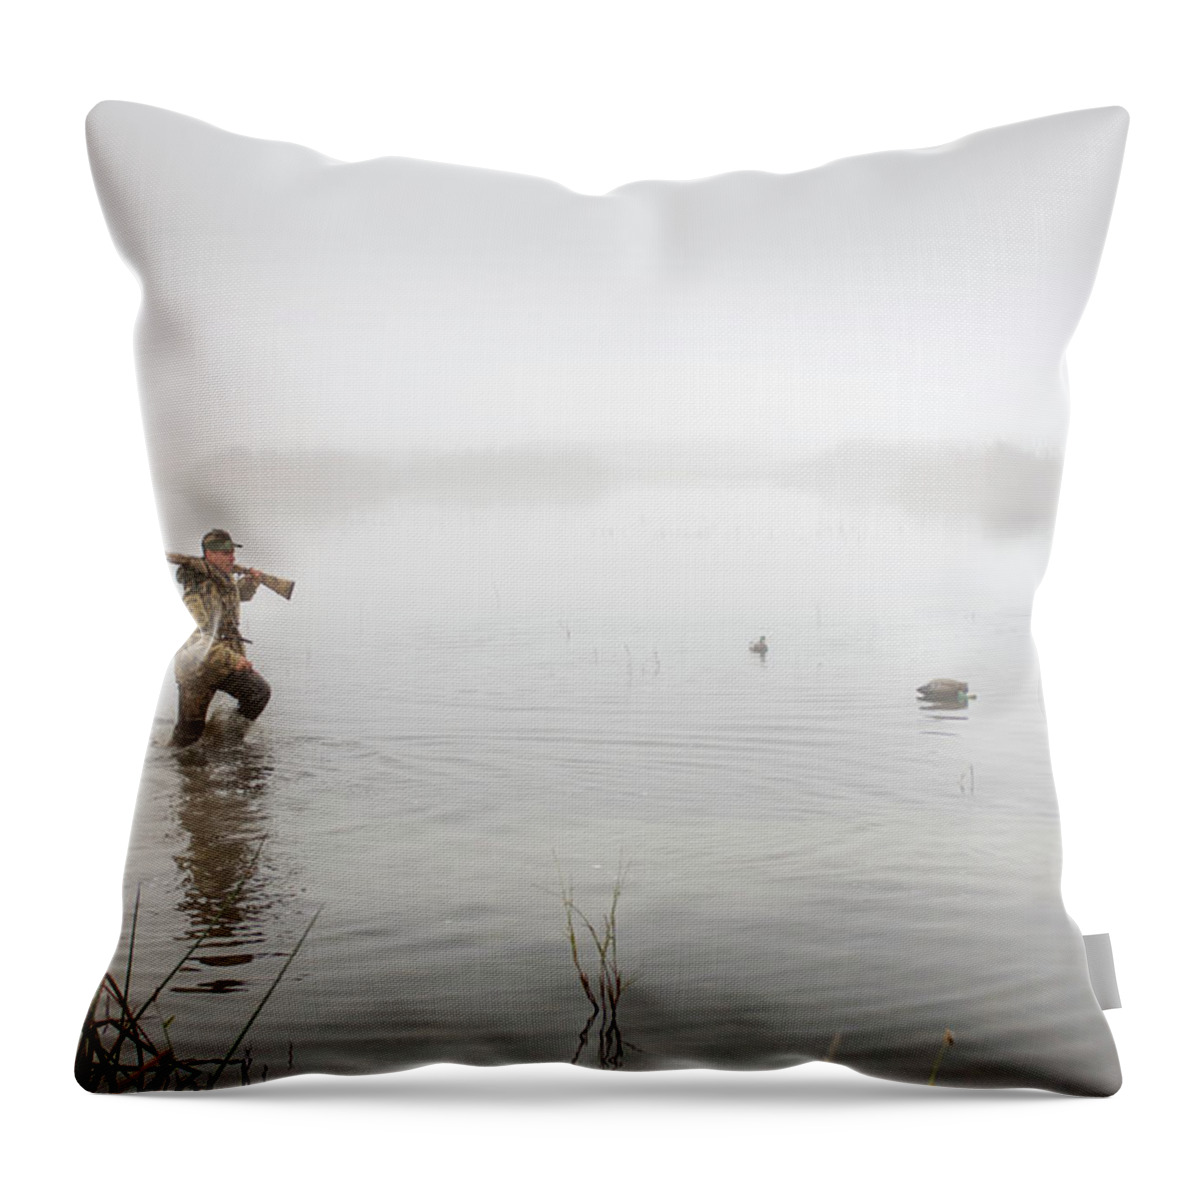 Tranquility Throw Pillow featuring the photograph A Hunter In The Water Wearing by Laura Ciapponi / Design Pics